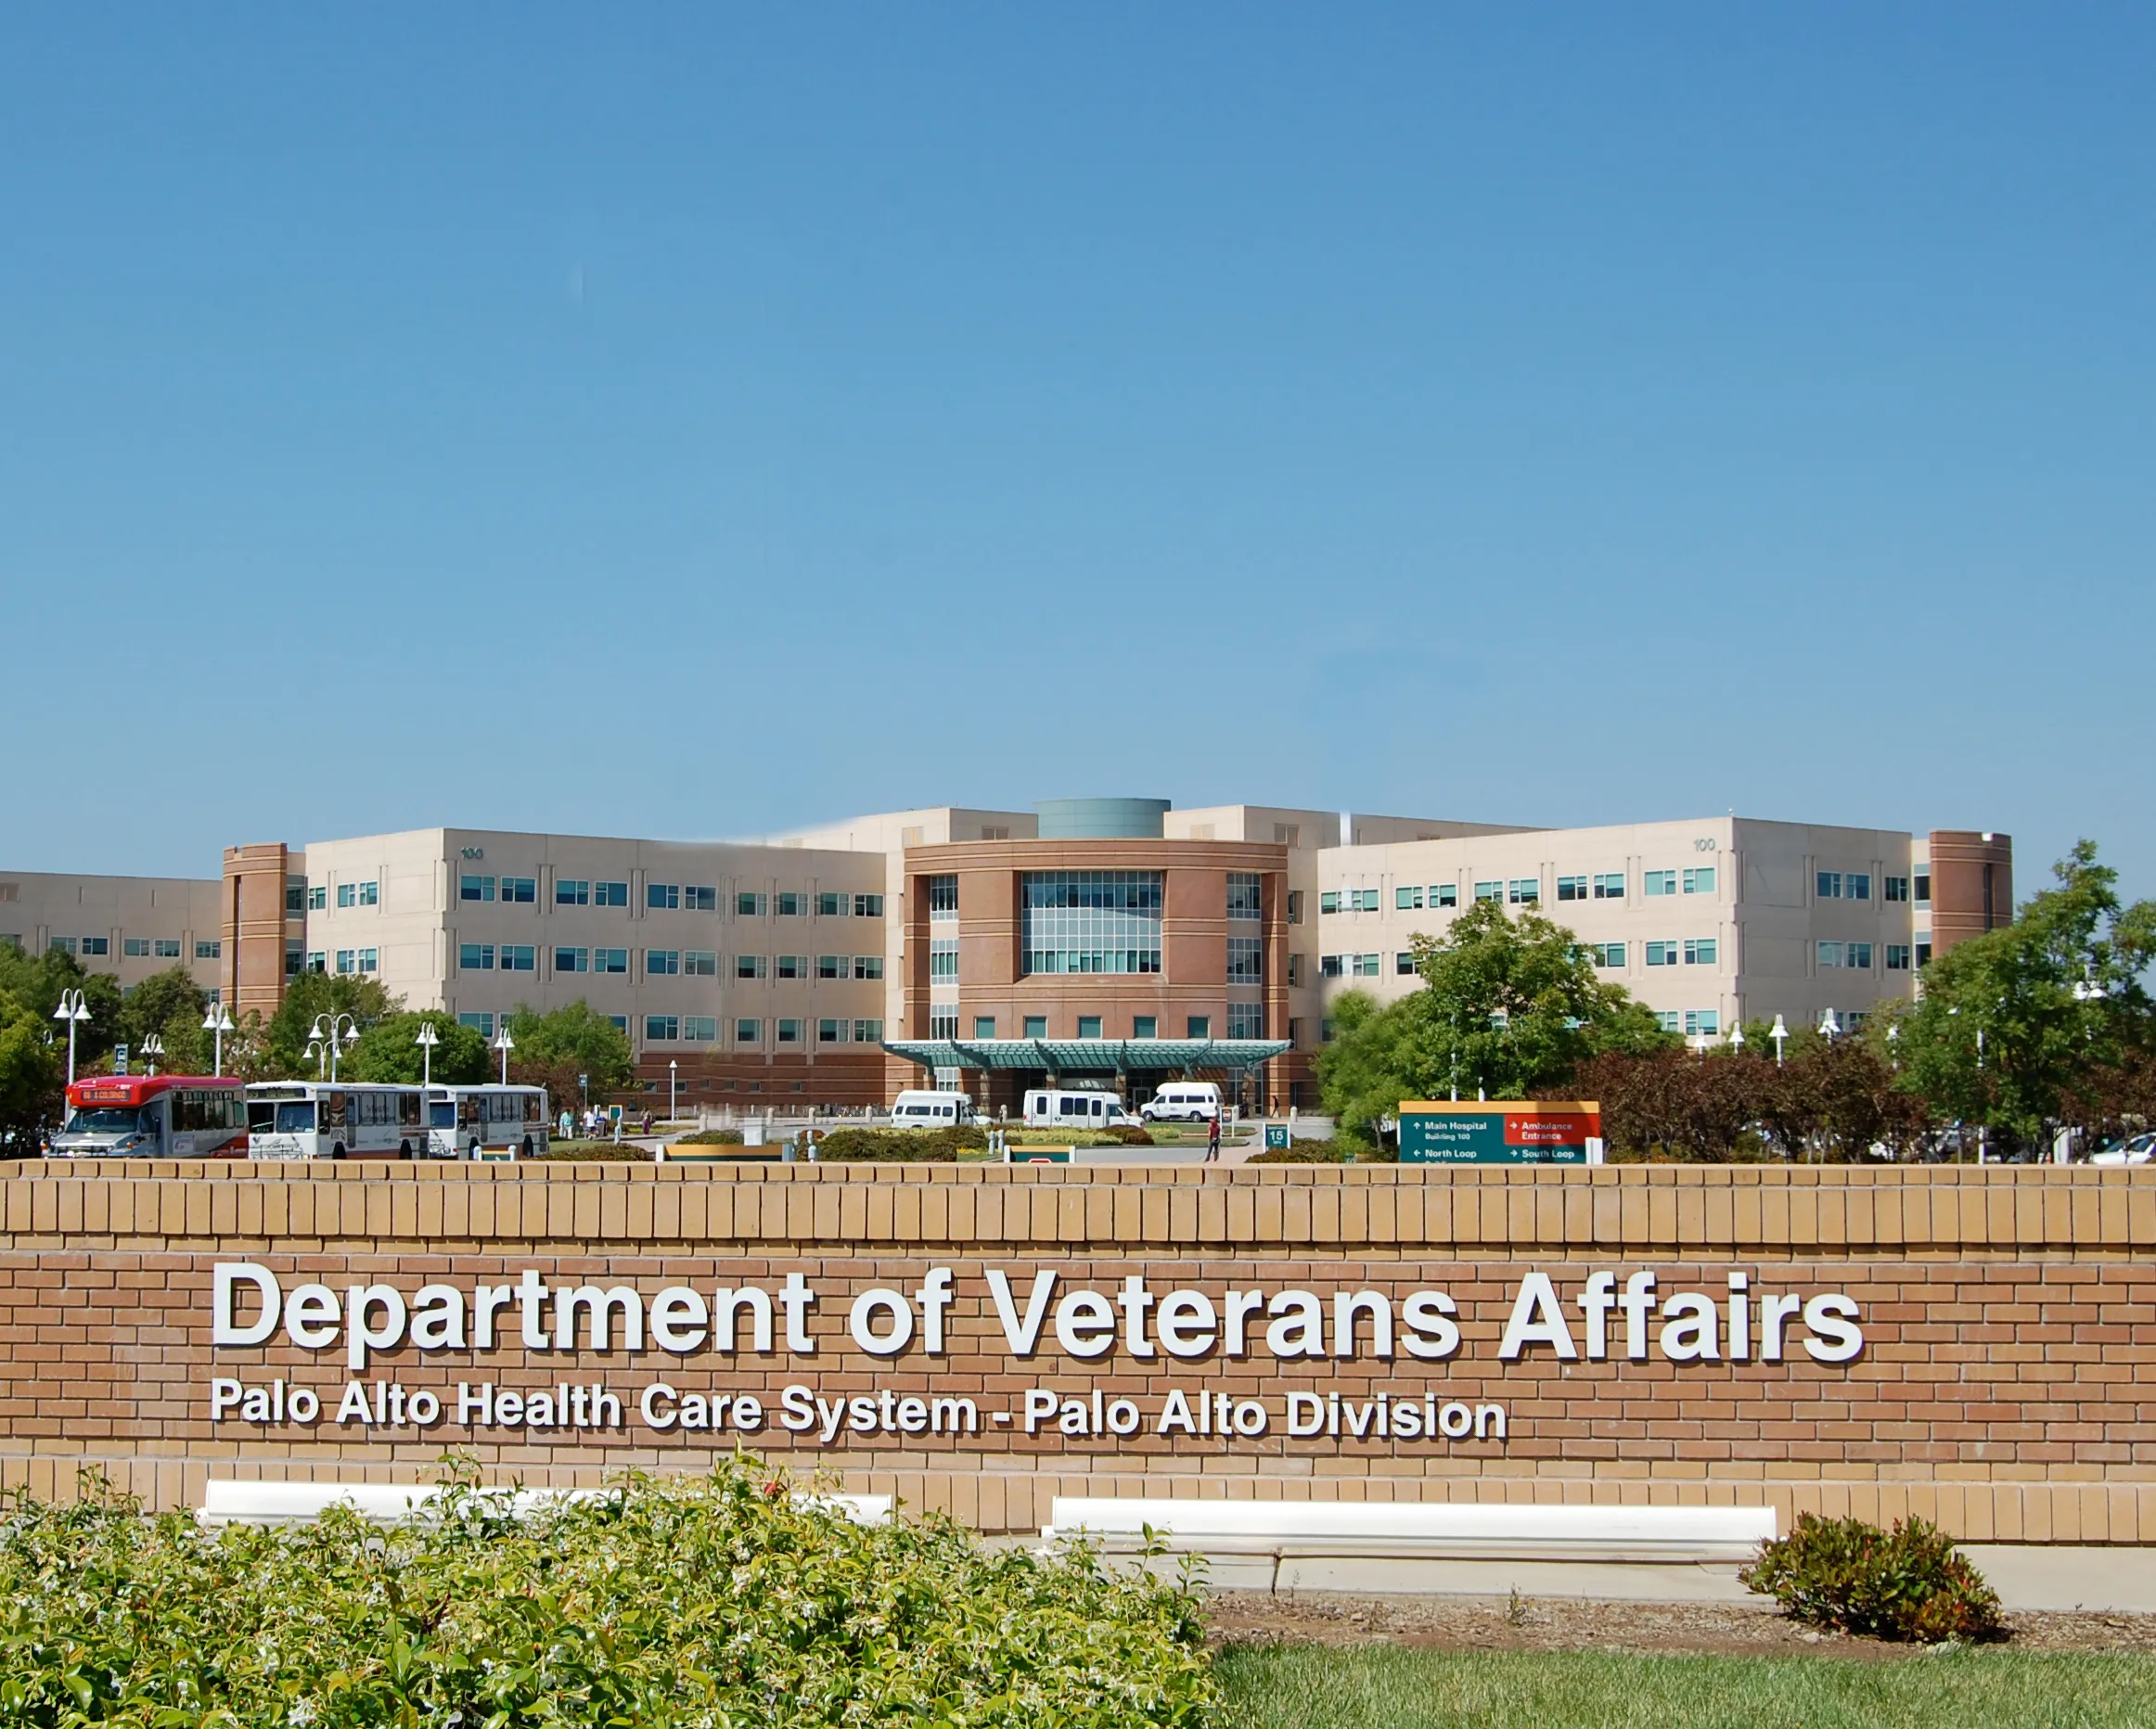 The Palo Alto Health Care System Department of Veterans Affairs